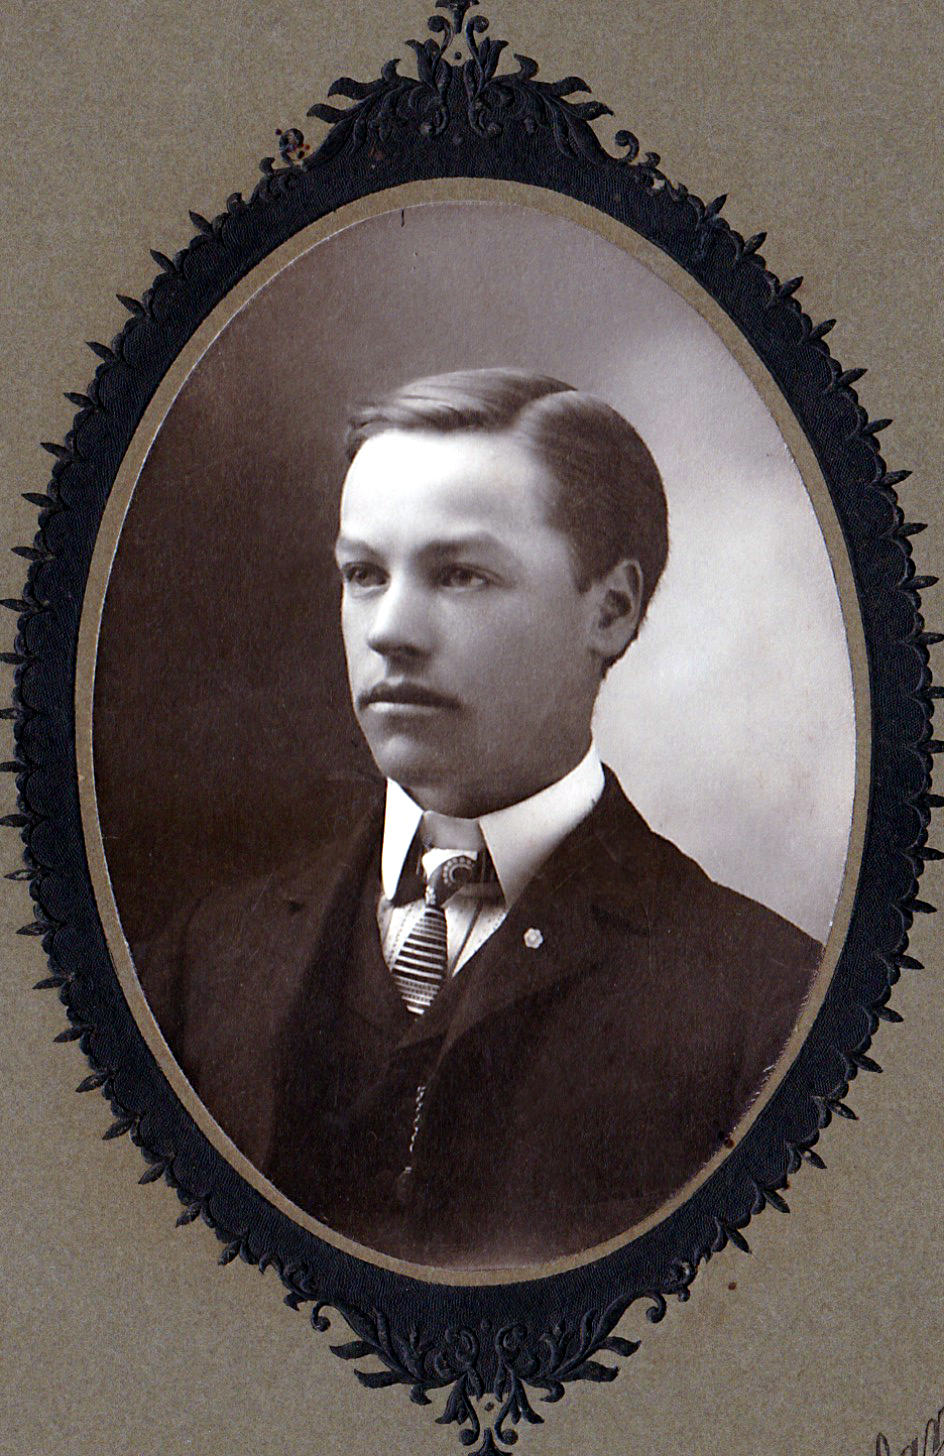 Photo of Olaf Lybeck as a young man.